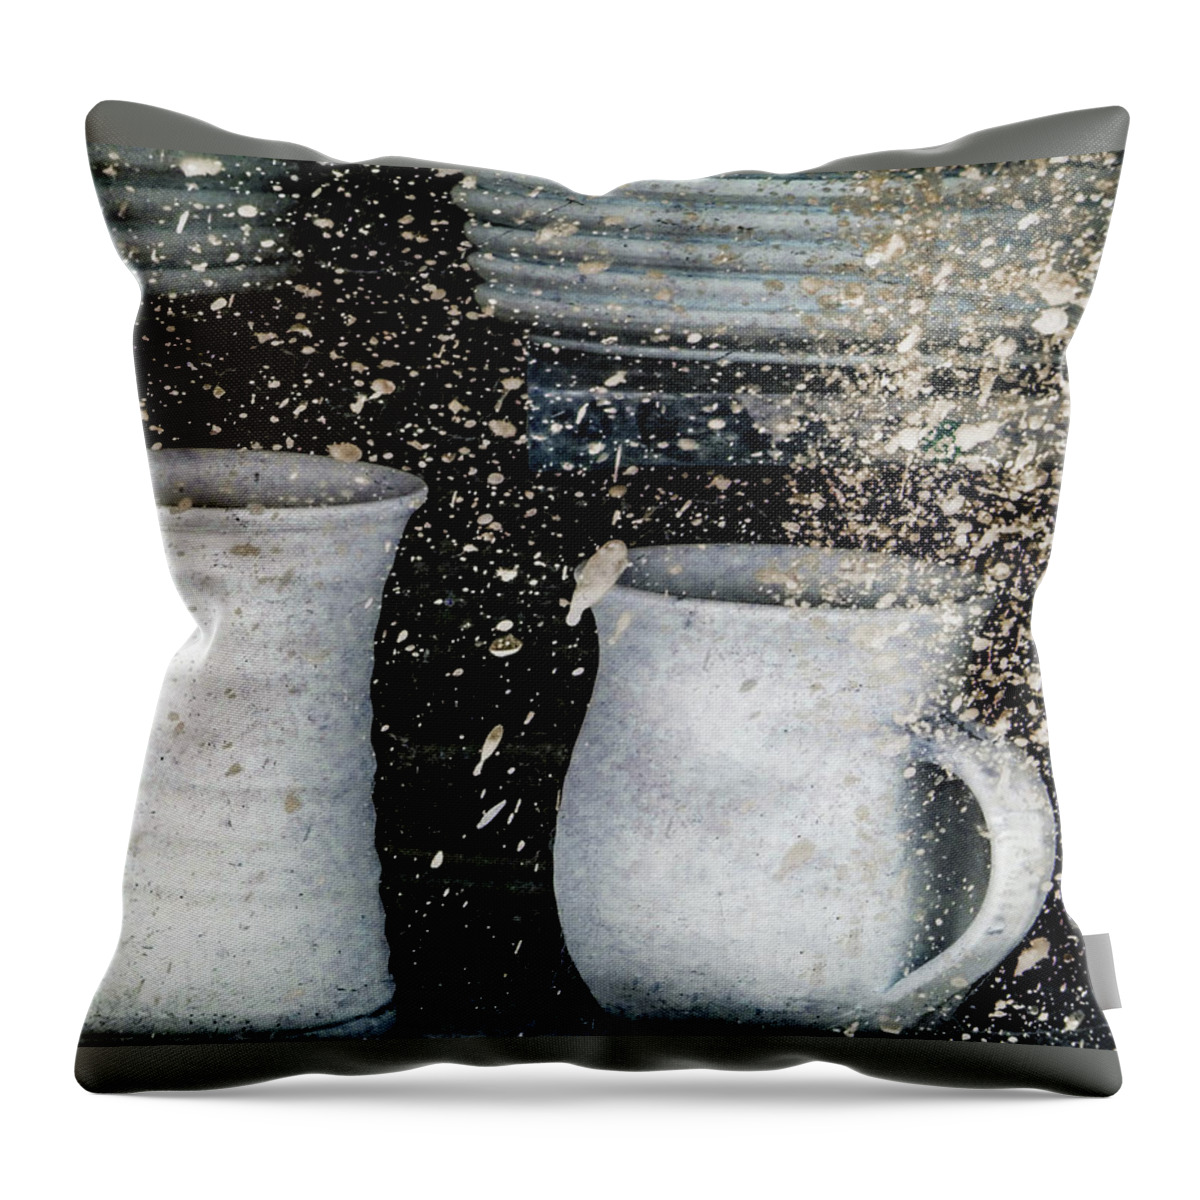 Art Throw Pillow featuring the photograph Just a Little Too Fast on the Pottery Wheel by Steve Taylor